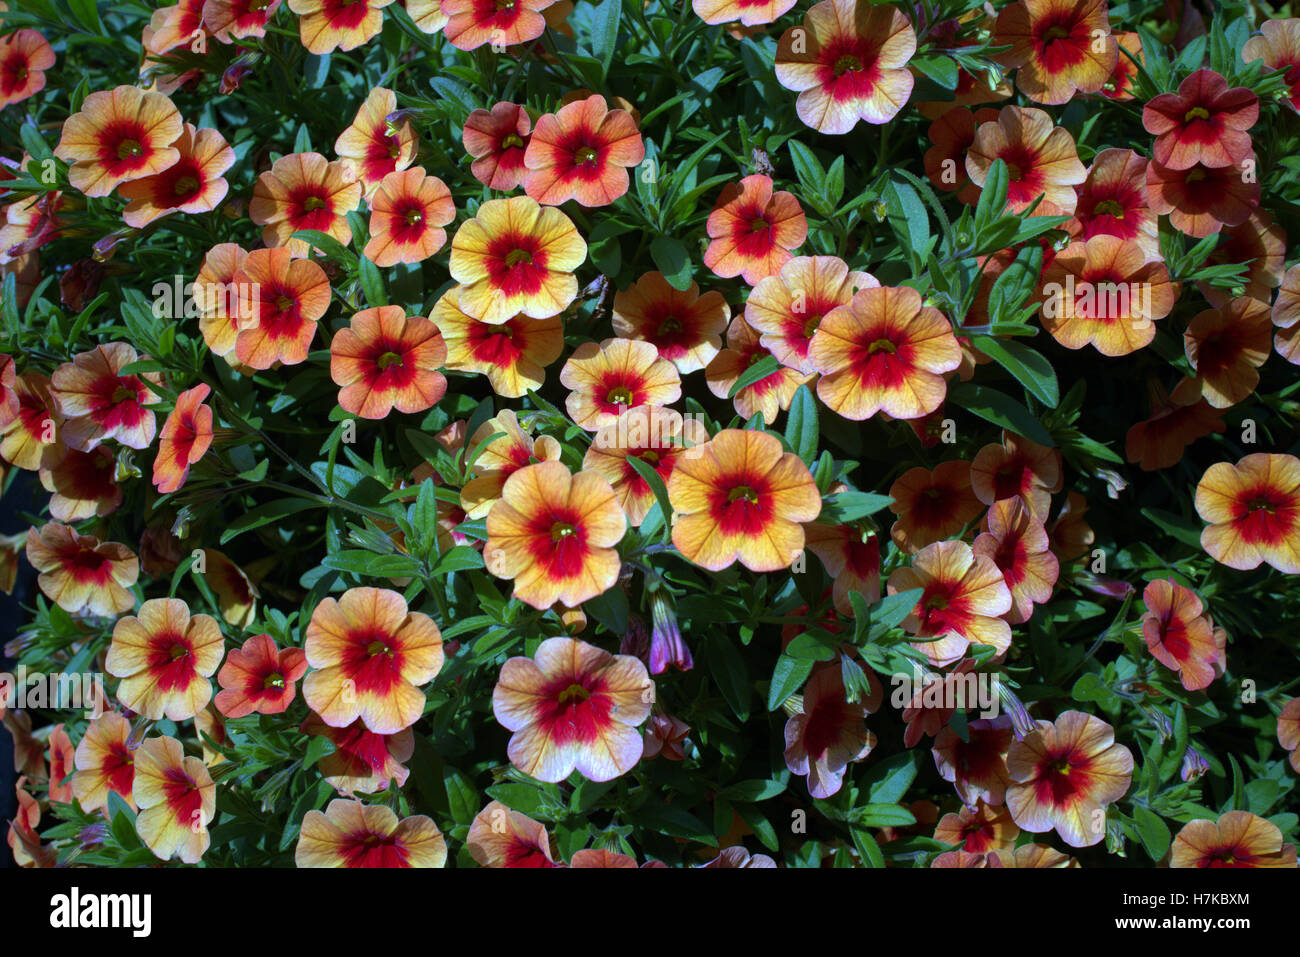 hanging basket flowers in close up Stock Photo